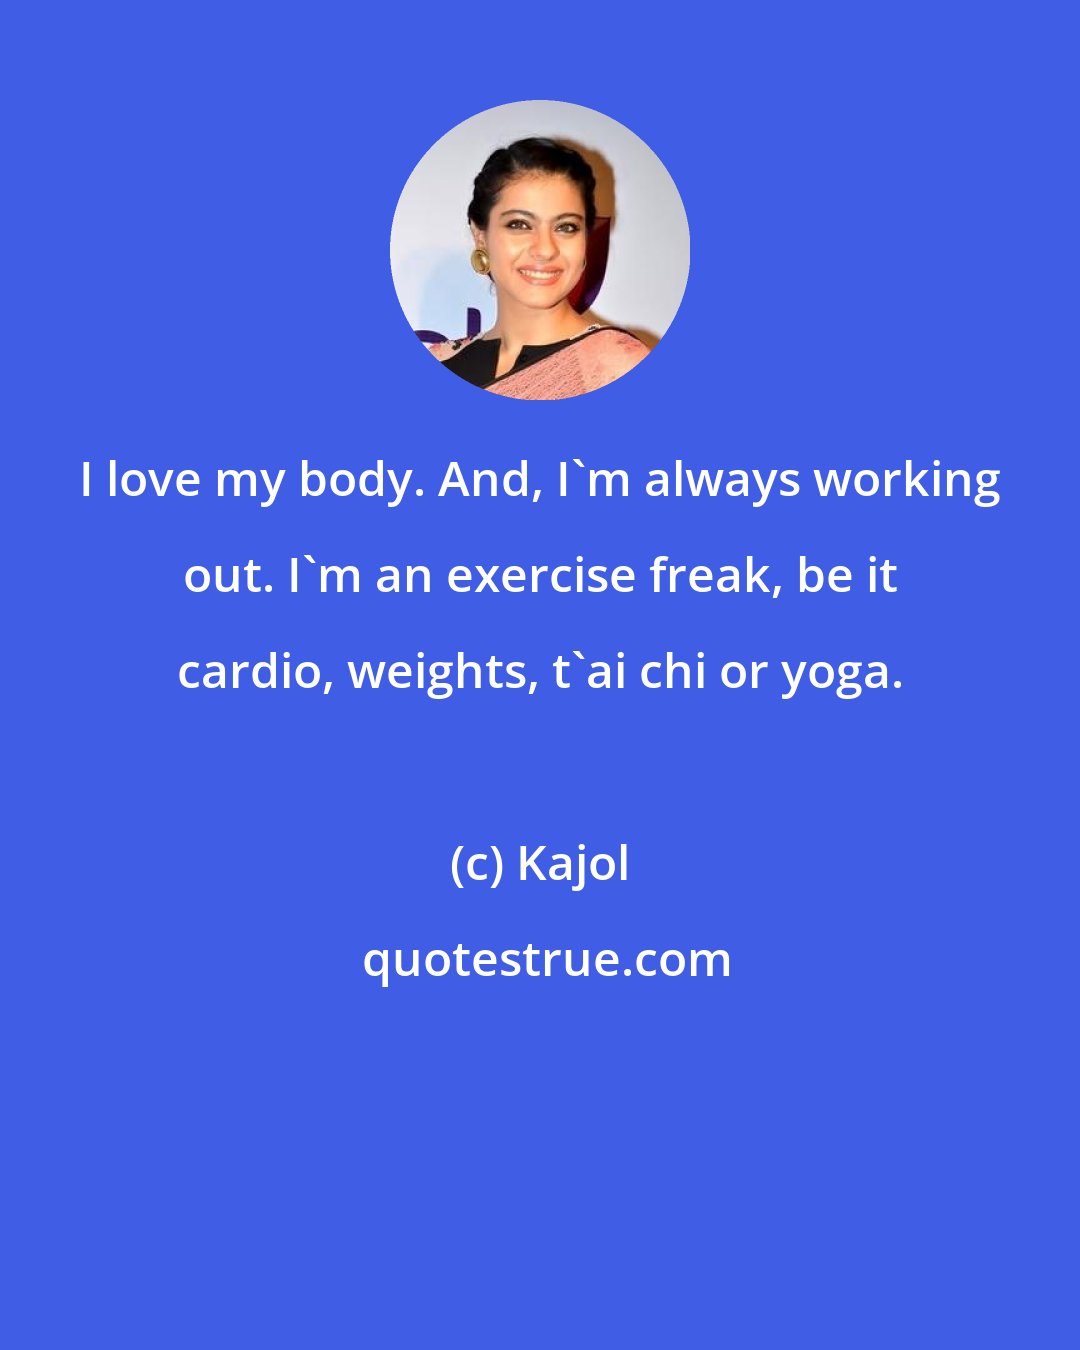 Kajol: I love my body. And, I'm always working out. I'm an exercise freak, be it cardio, weights, t'ai chi or yoga.